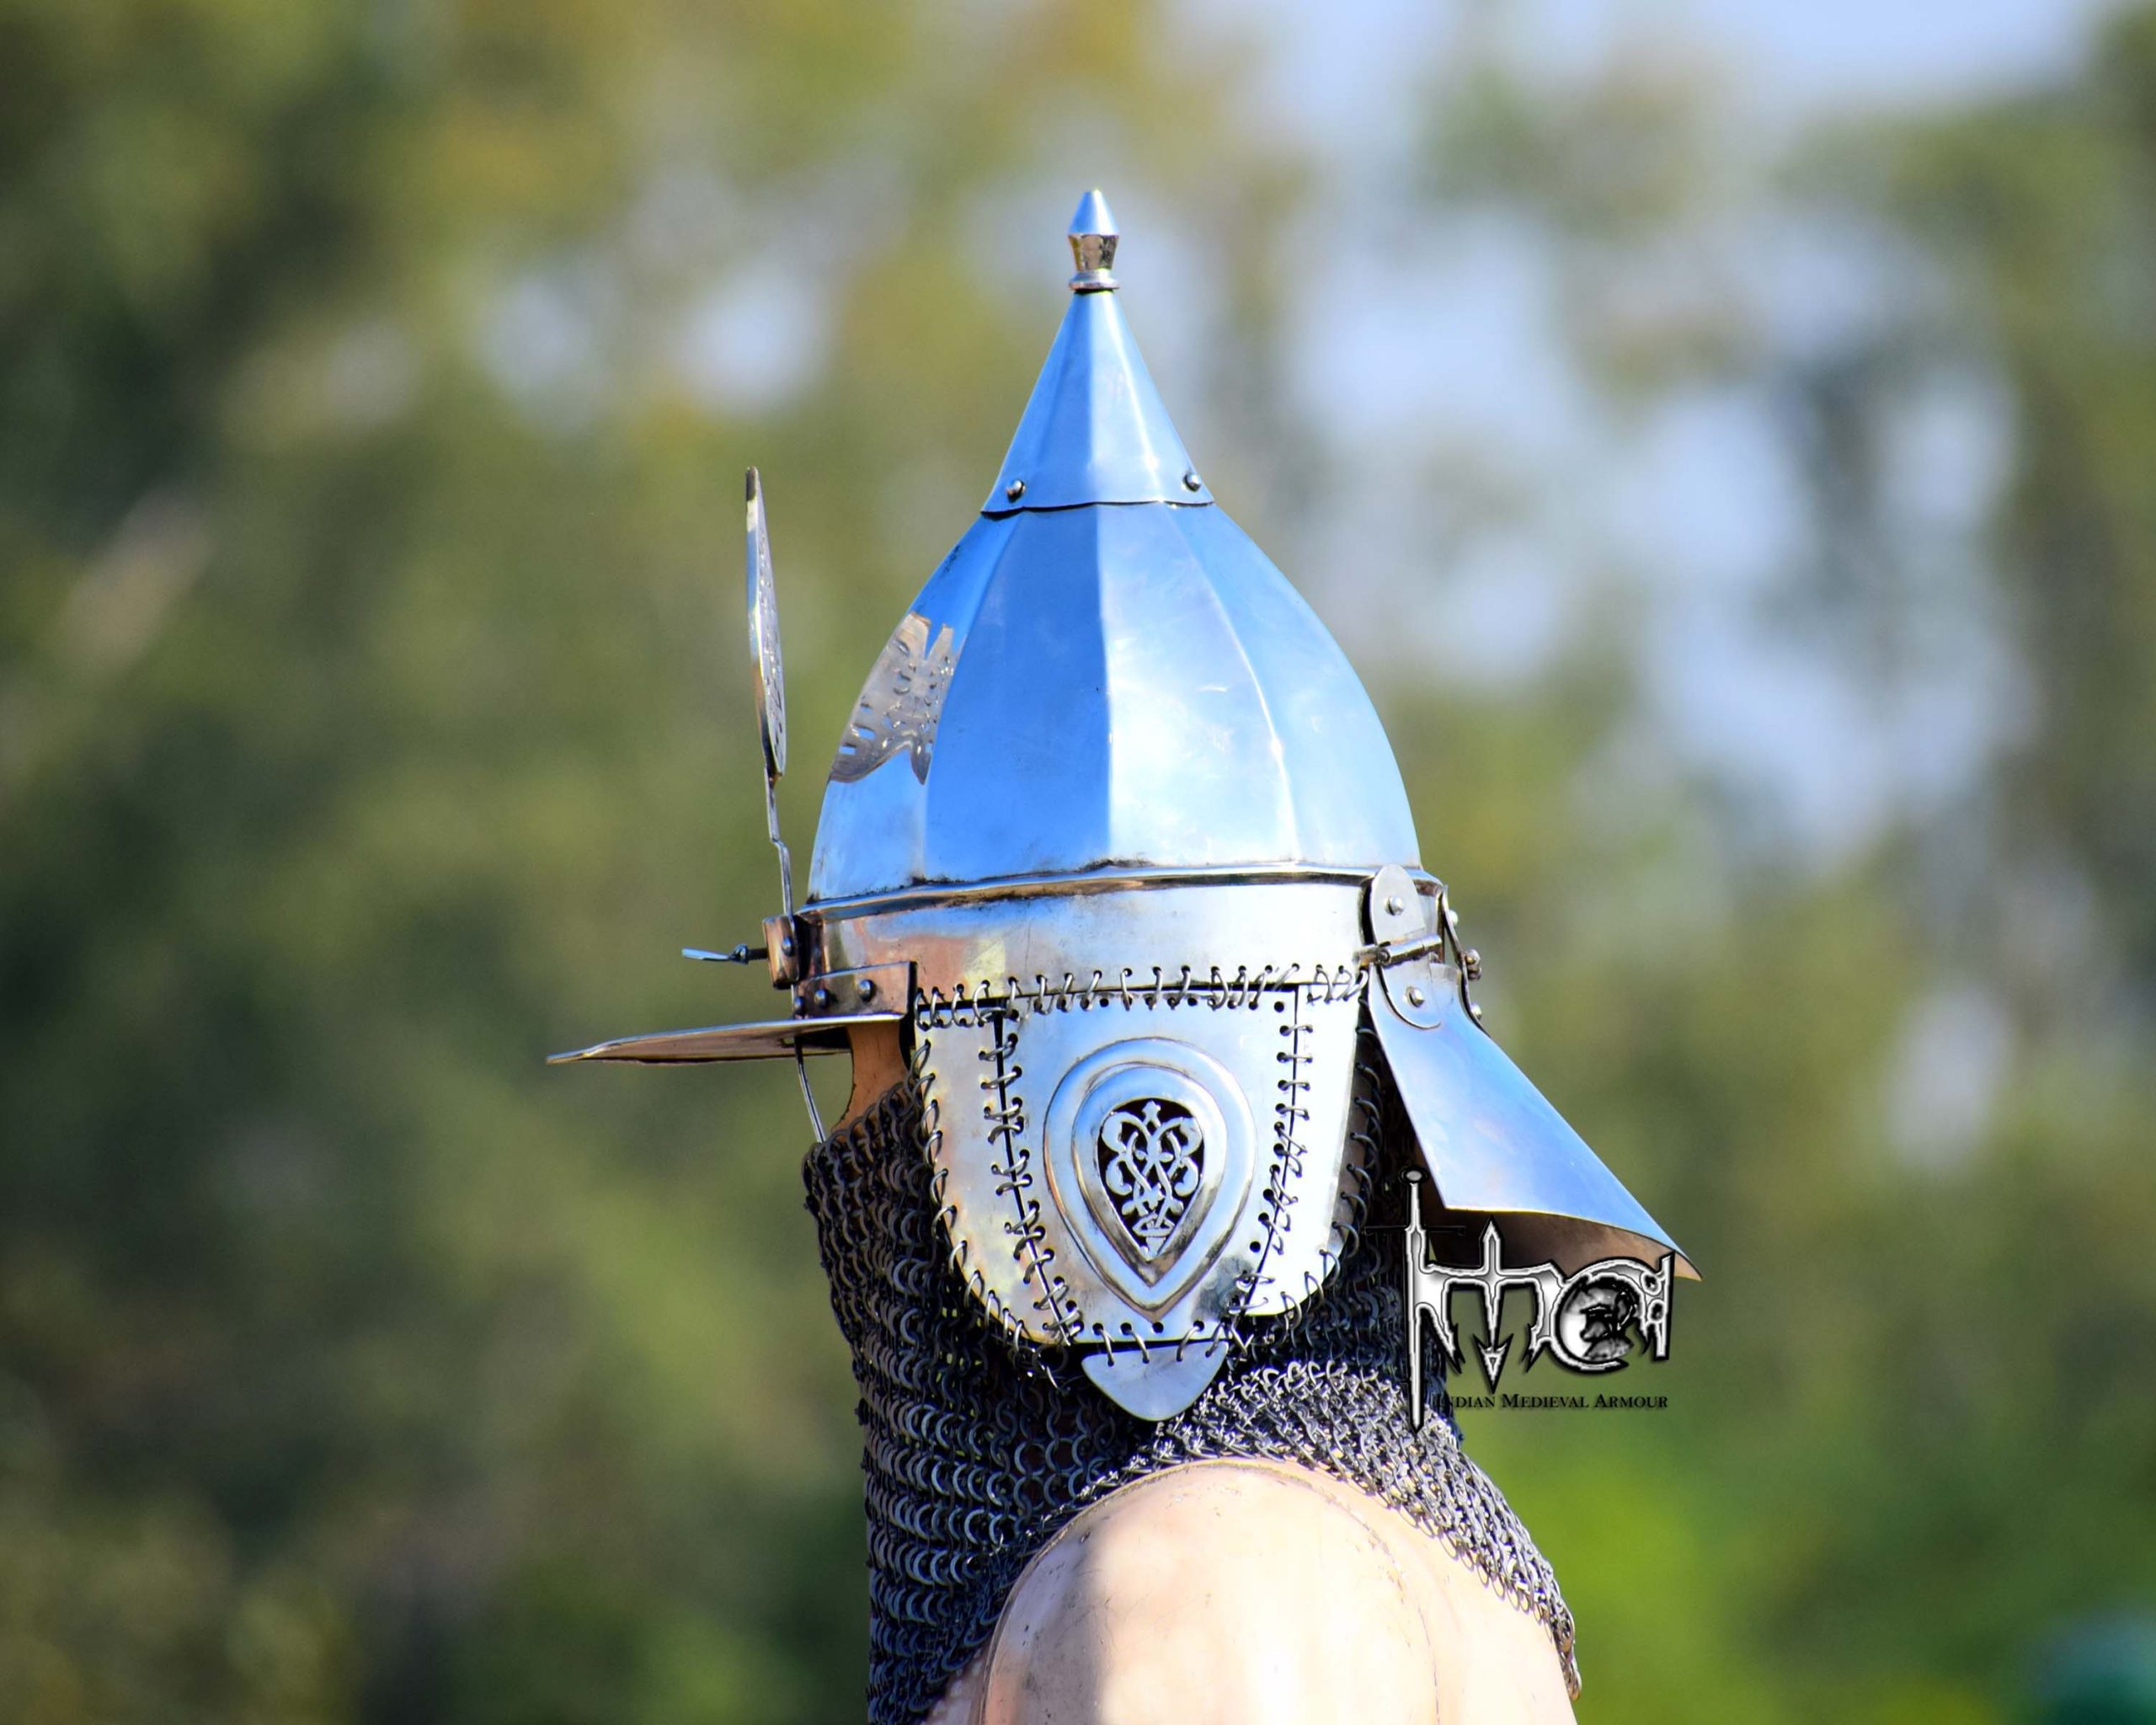 Medieval Knights 17 Gauge Chainmail Mask